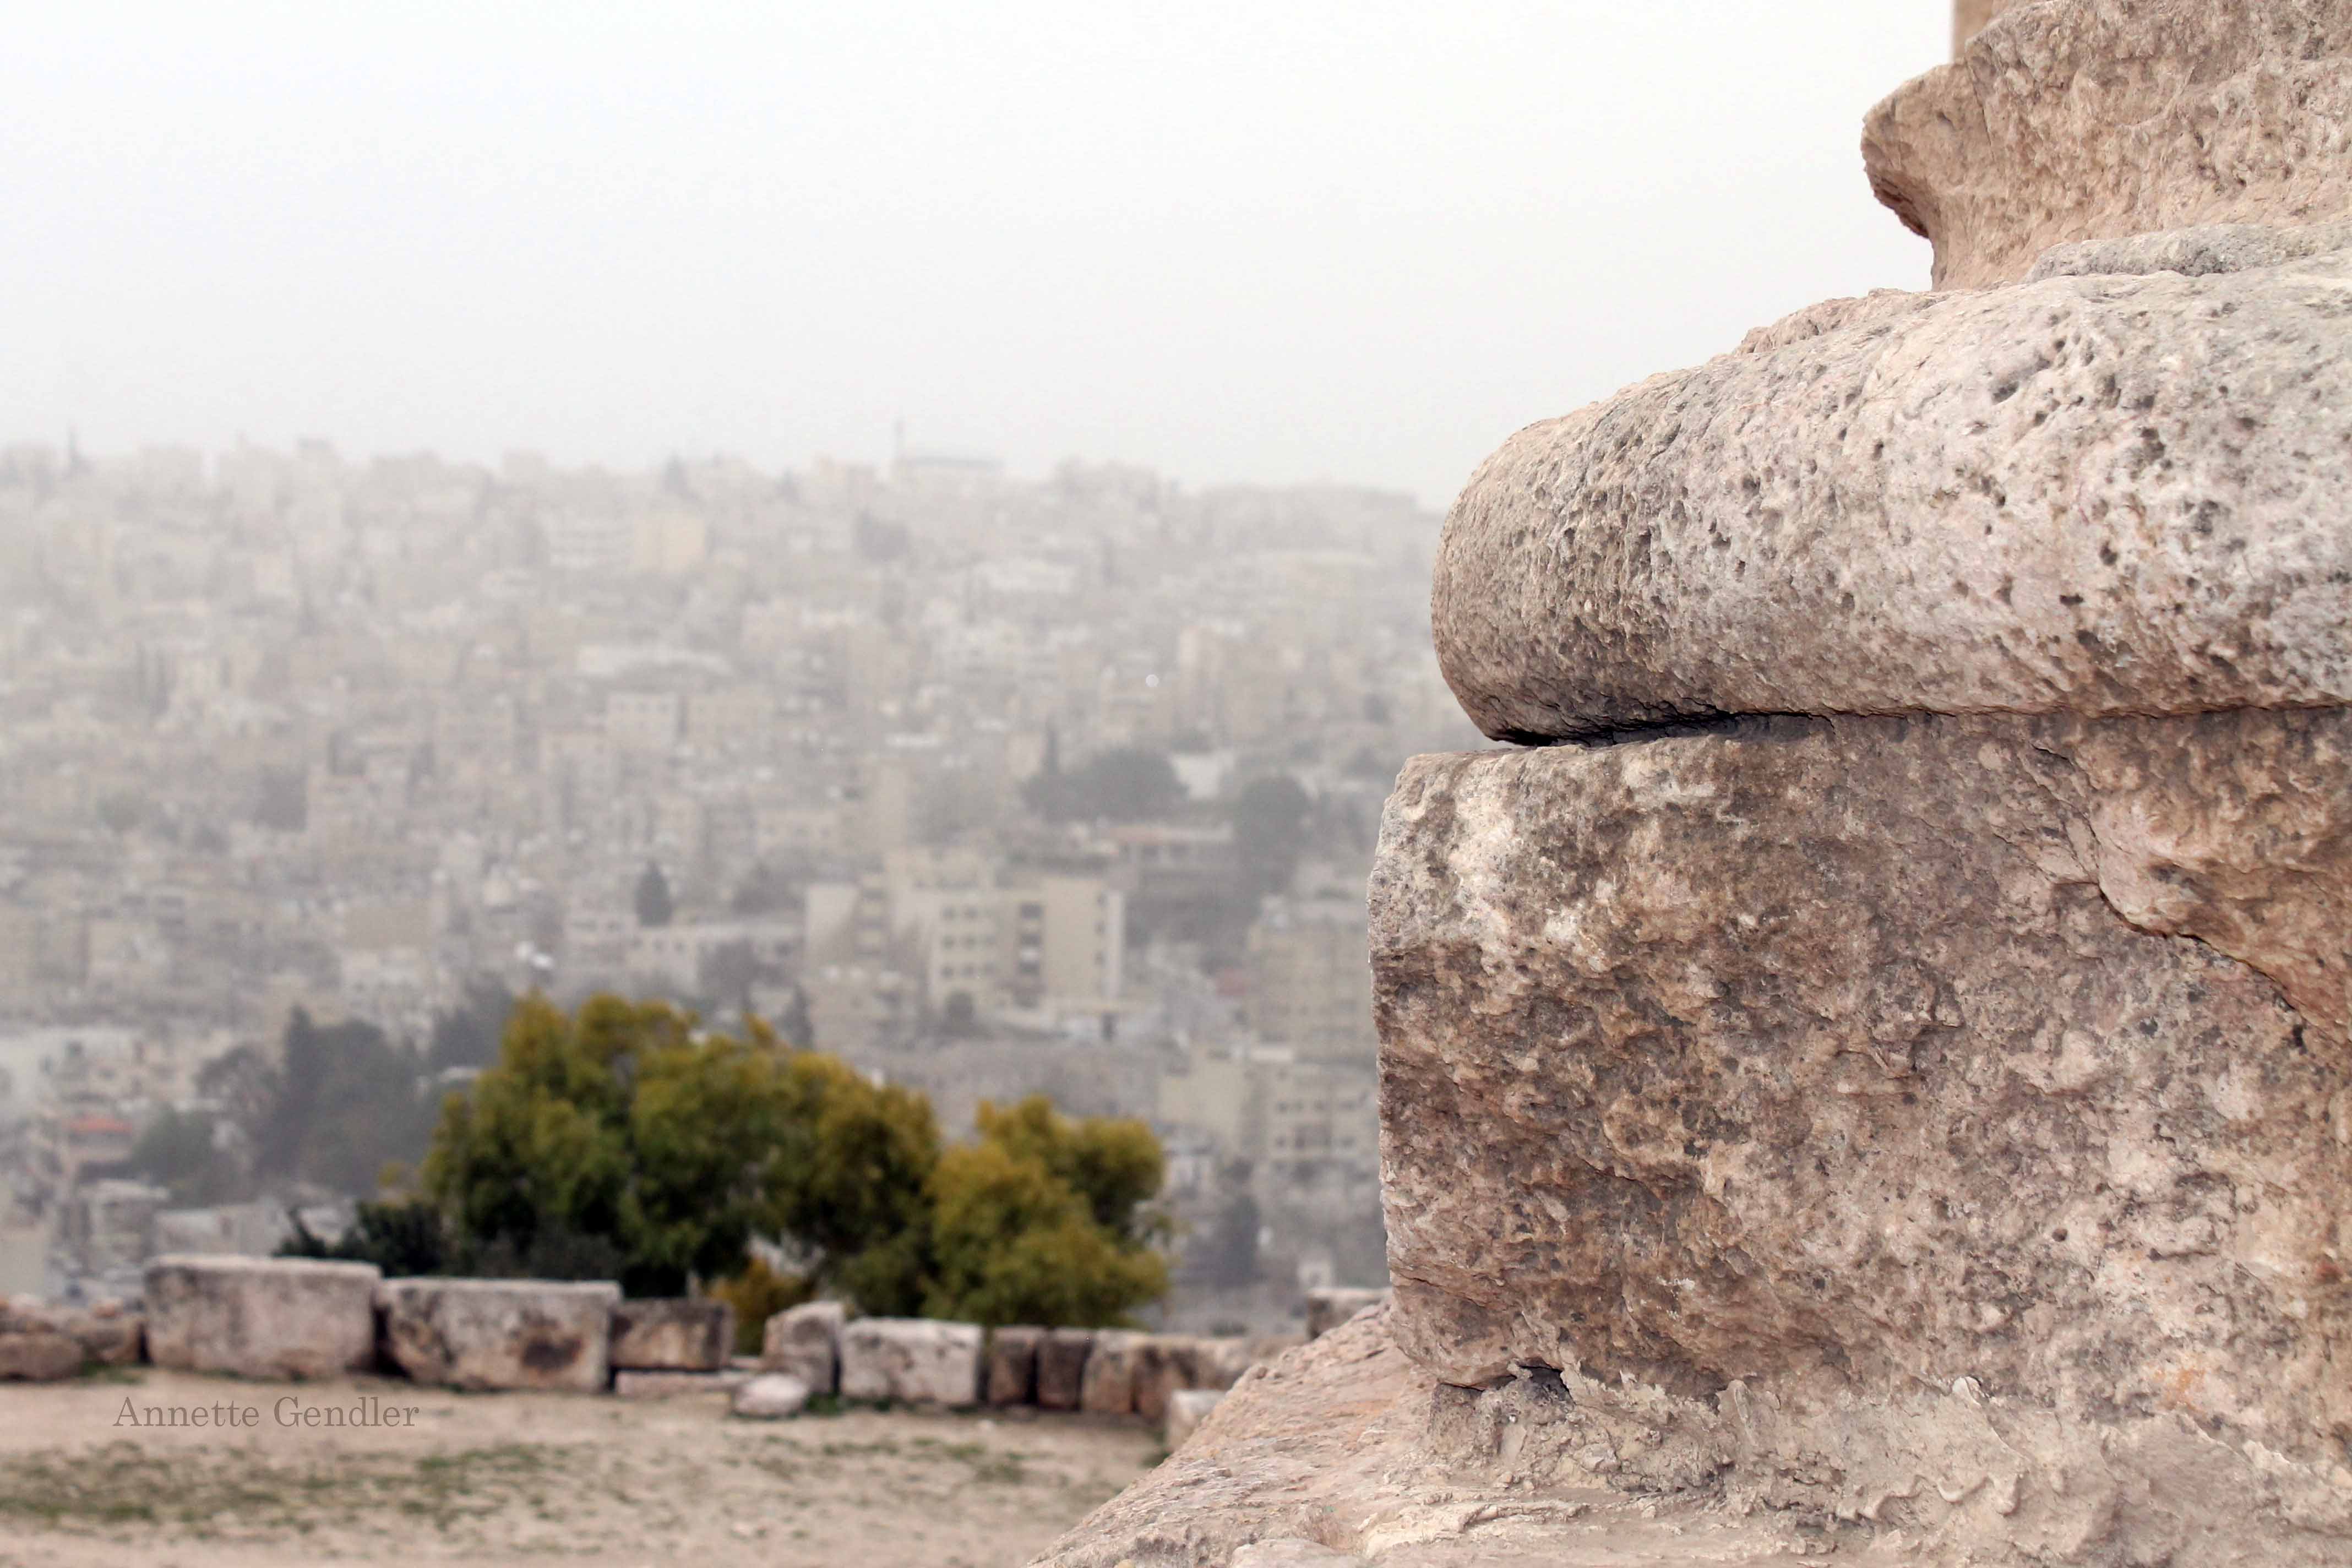 Roman column in foreground, view of city of Amman in background